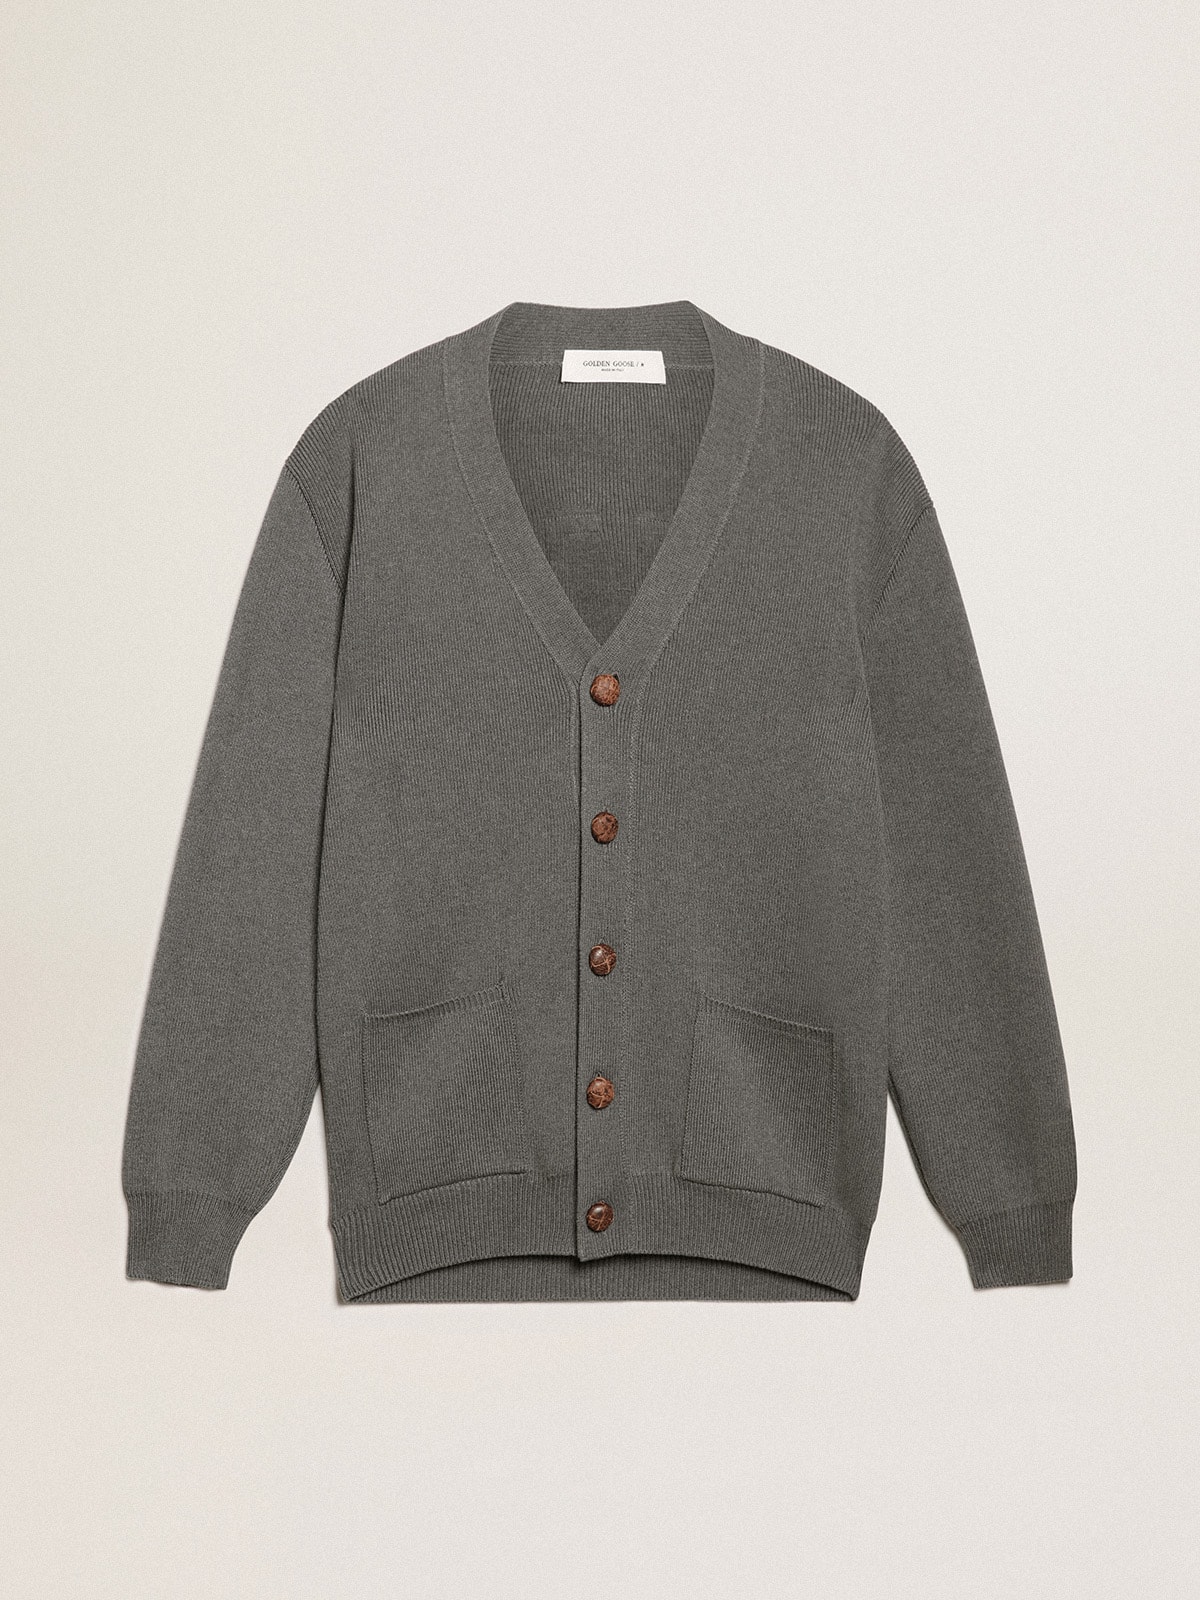 Men's cardigan in mélange gray cotton with logo on the back